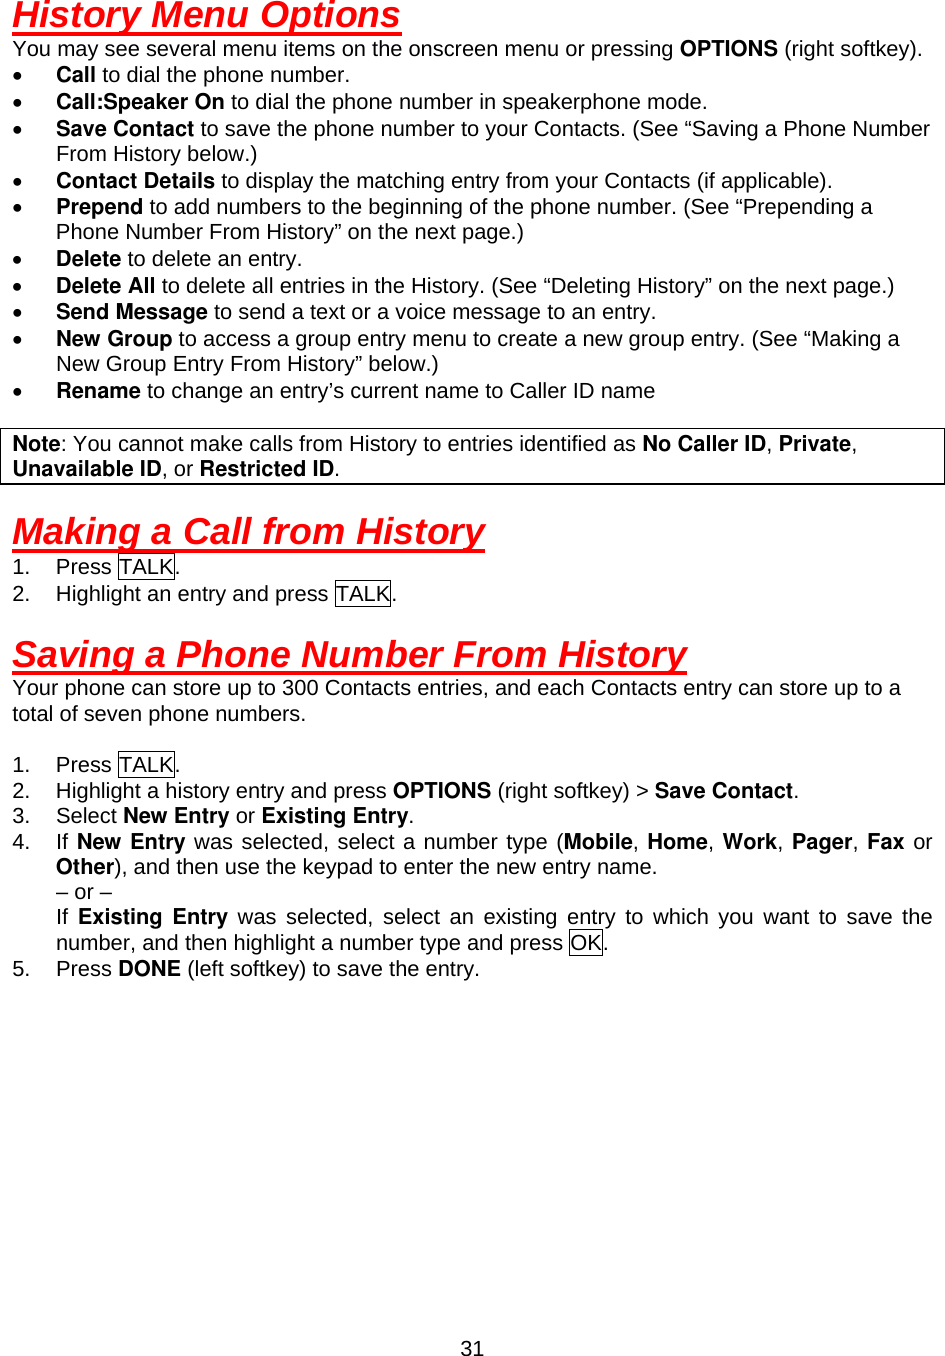  31History Menu Options You may see several menu items on the onscreen menu or pressing OPTIONS (right softkey). •  Call to dial the phone number. •  Call:Speaker On to dial the phone number in speakerphone mode. •  Save Contact to save the phone number to your Contacts. (See “Saving a Phone Number From History below.) •  Contact Details to display the matching entry from your Contacts (if applicable). •  Prepend to add numbers to the beginning of the phone number. (See “Prepending a Phone Number From History” on the next page.)                                                      •  Delete to delete an entry. •  Delete All to delete all entries in the History. (See “Deleting History” on the next page.) •  Send Message to send a text or a voice message to an entry. •  New Group to access a group entry menu to create a new group entry. (See “Making a New Group Entry From History” below.) •  Rename to change an entry’s current name to Caller ID name  Note: You cannot make calls from History to entries identified as No Caller ID, Private, Unavailable ID, or Restricted ID.  Making a Call from History 1. Press TALK. 2.  Highlight an entry and press TALK.  Saving a Phone Number From History Your phone can store up to 300 Contacts entries, and each Contacts entry can store up to a total of seven phone numbers.  1. Press TALK. 2.  Highlight a history entry and press OPTIONS (right softkey) &gt; Save Contact. 3. Select New Entry or Existing Entry. 4. If New Entry was selected, select a number type (Mobile, Home, Work, Pager, Fax or Other), and then use the keypad to enter the new entry name.     – or –     If Existing Entry was selected, select an existing entry to which you want to save the number, and then highlight a number type and press OK. 5. Press DONE (left softkey) to save the entry. 